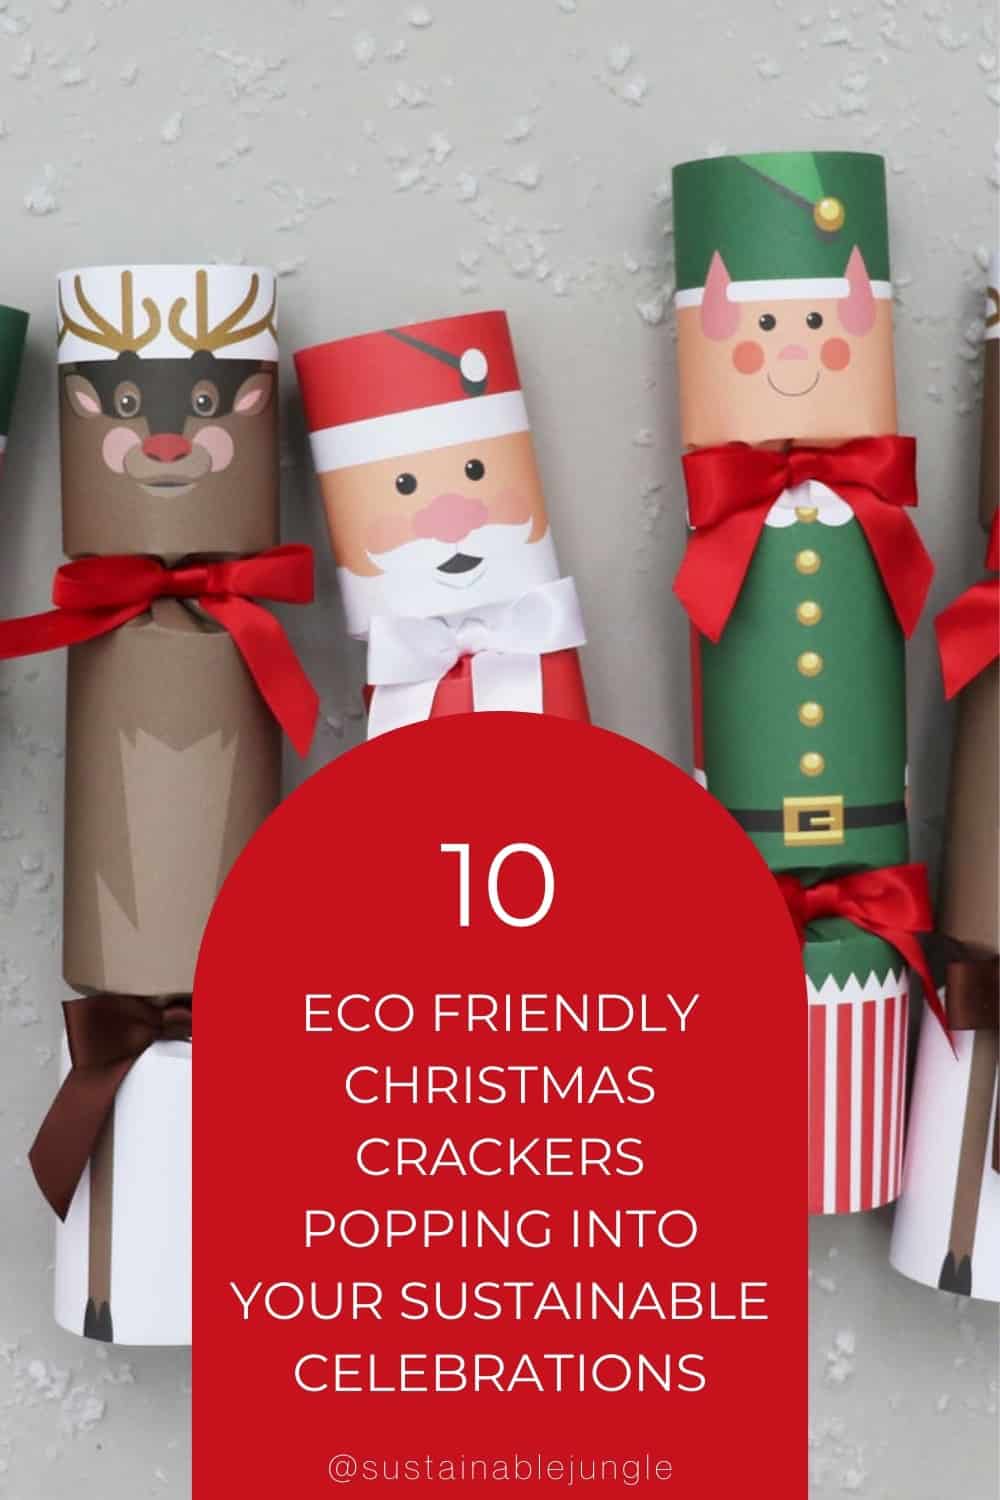 10 Eco Friendly Christmas Crackers Popping Into Your Sustainable Celebrations #ecofriendlychristmascrackers #ecofriendlychristmascrackersUK #ecofriendlychristmascrackersaustralia #bestecofriendlychristmascrackers #ecocrackers #ecochristmascrackers #sustainablejungle Image by Nancy & Betty